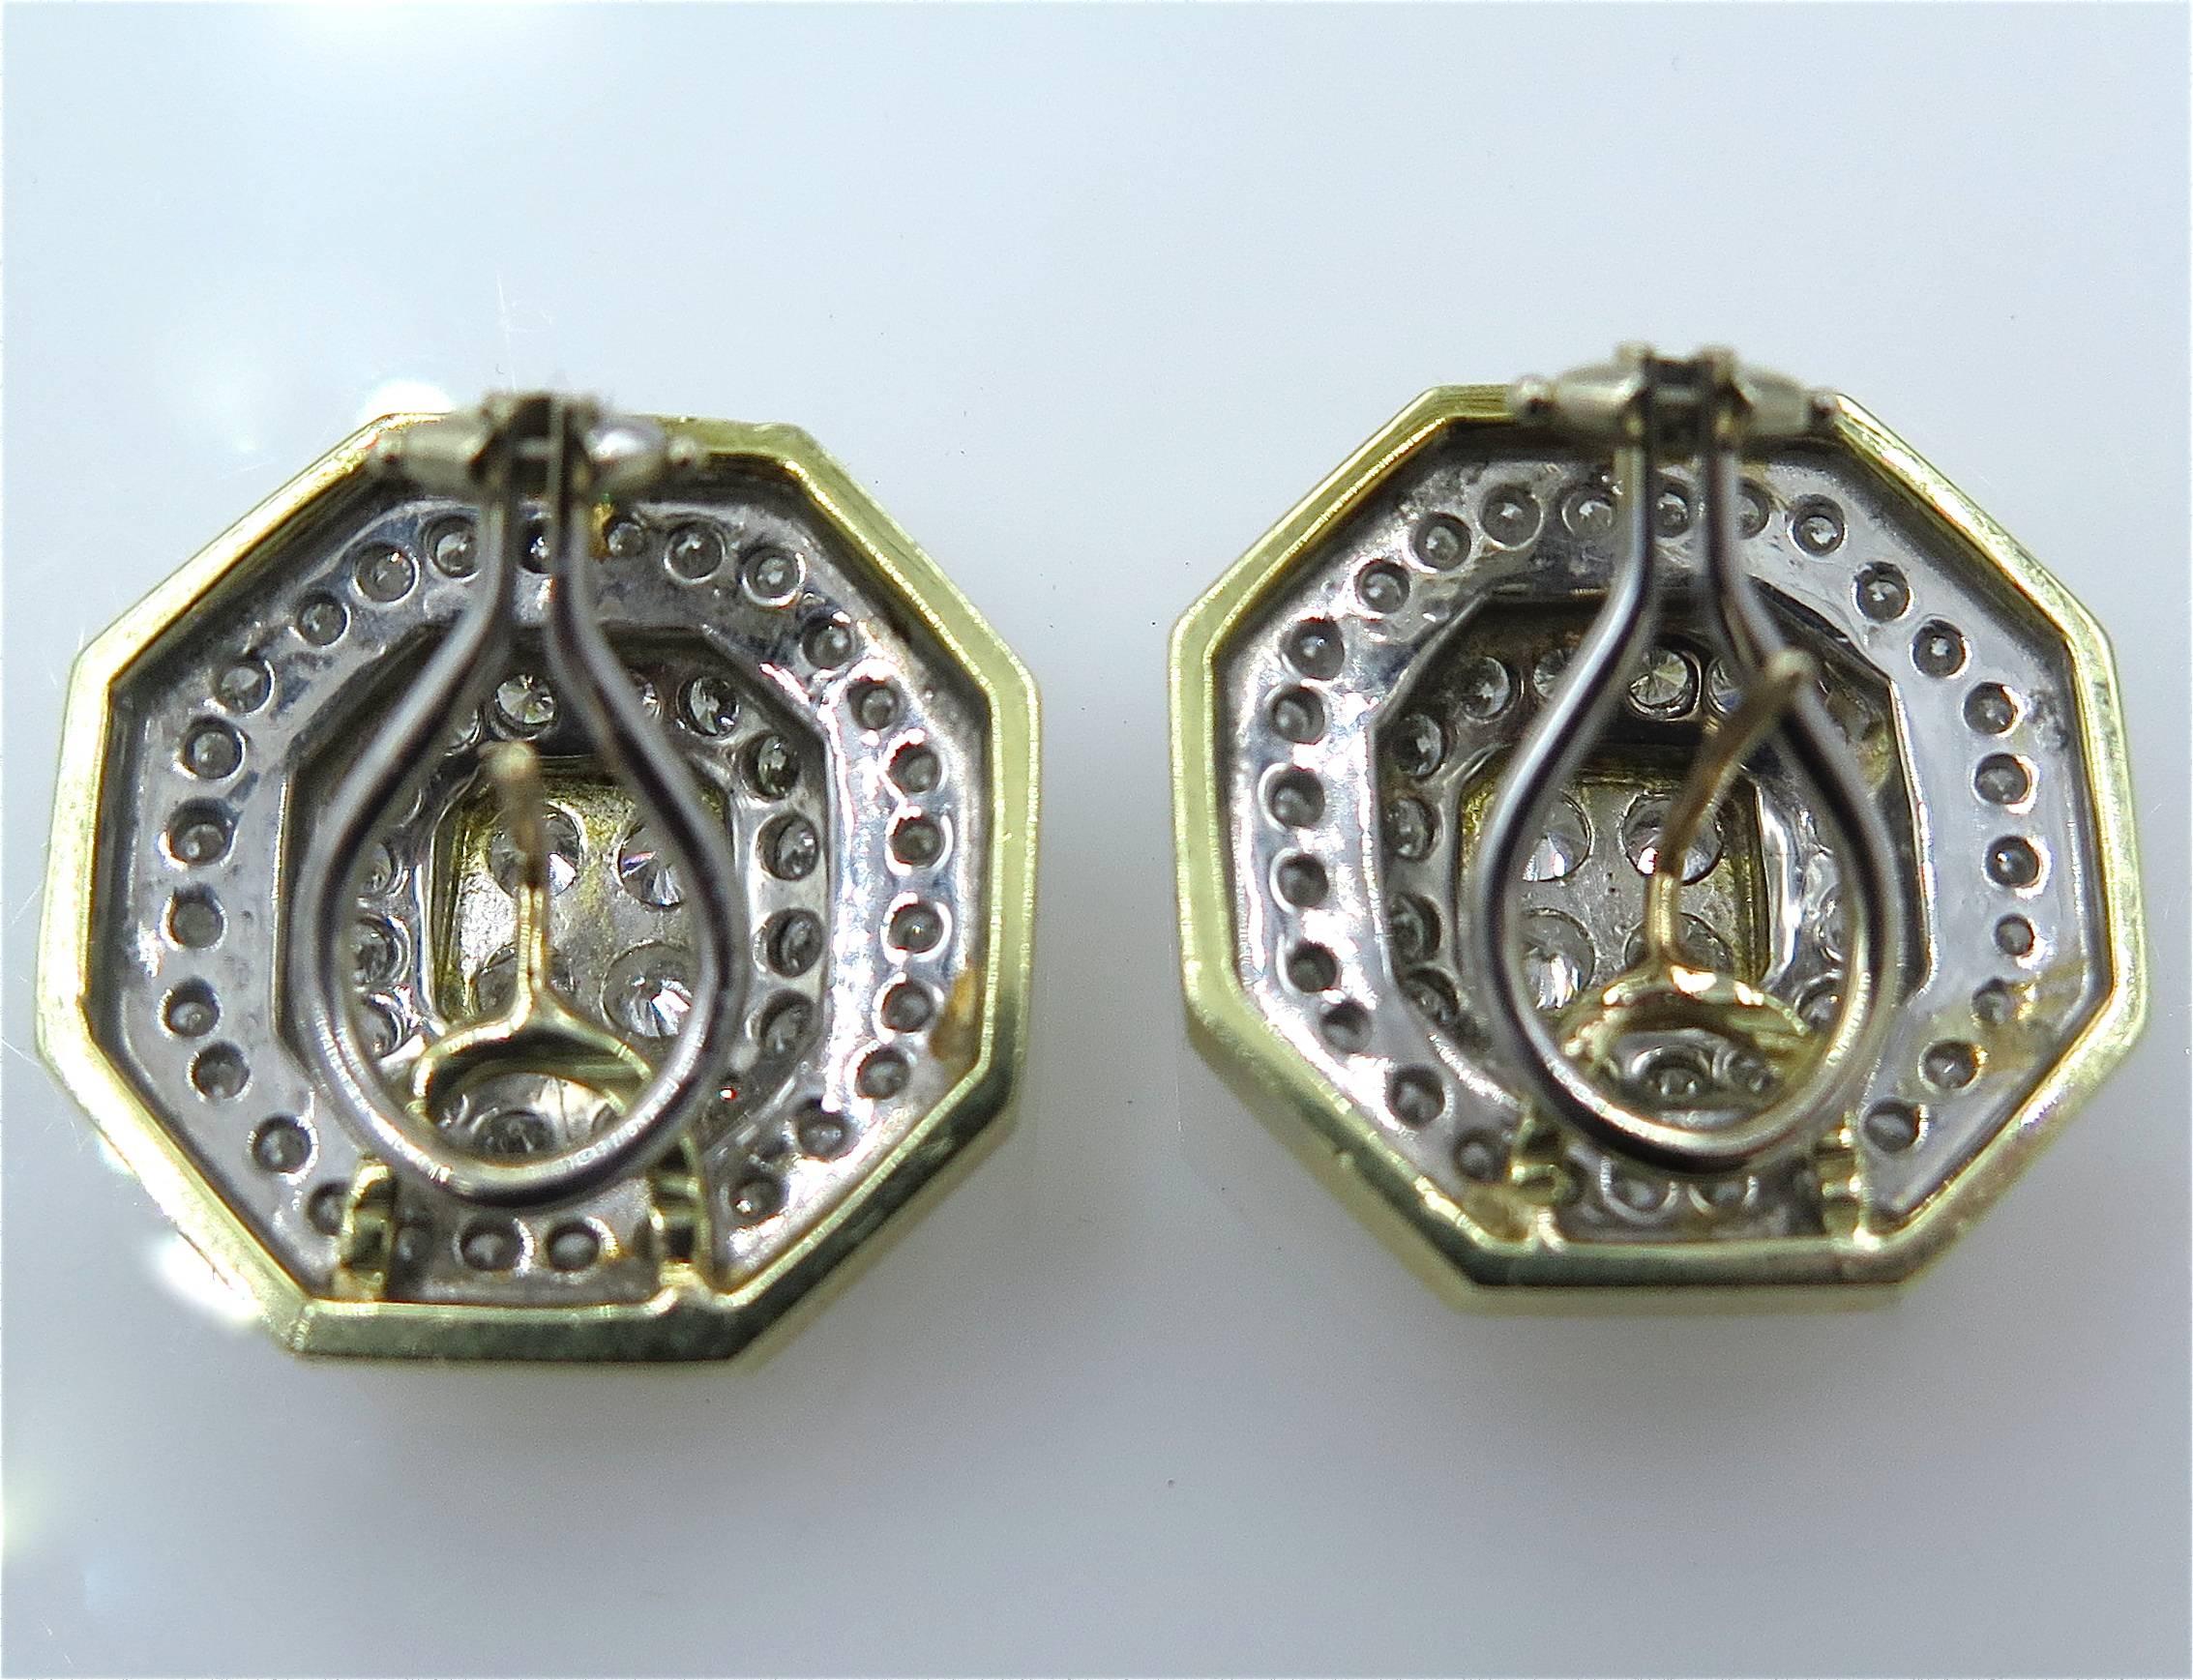 A pair of 14 karat yellow gold and diamond earrings. Each designed as a octagonal-shaped geometric plaque, set with pavé-set diamonds. (98) round brilliant-cut diamonds weigh approximately 4.00 carats. Diameter is 3/4 inches. Gross weight is